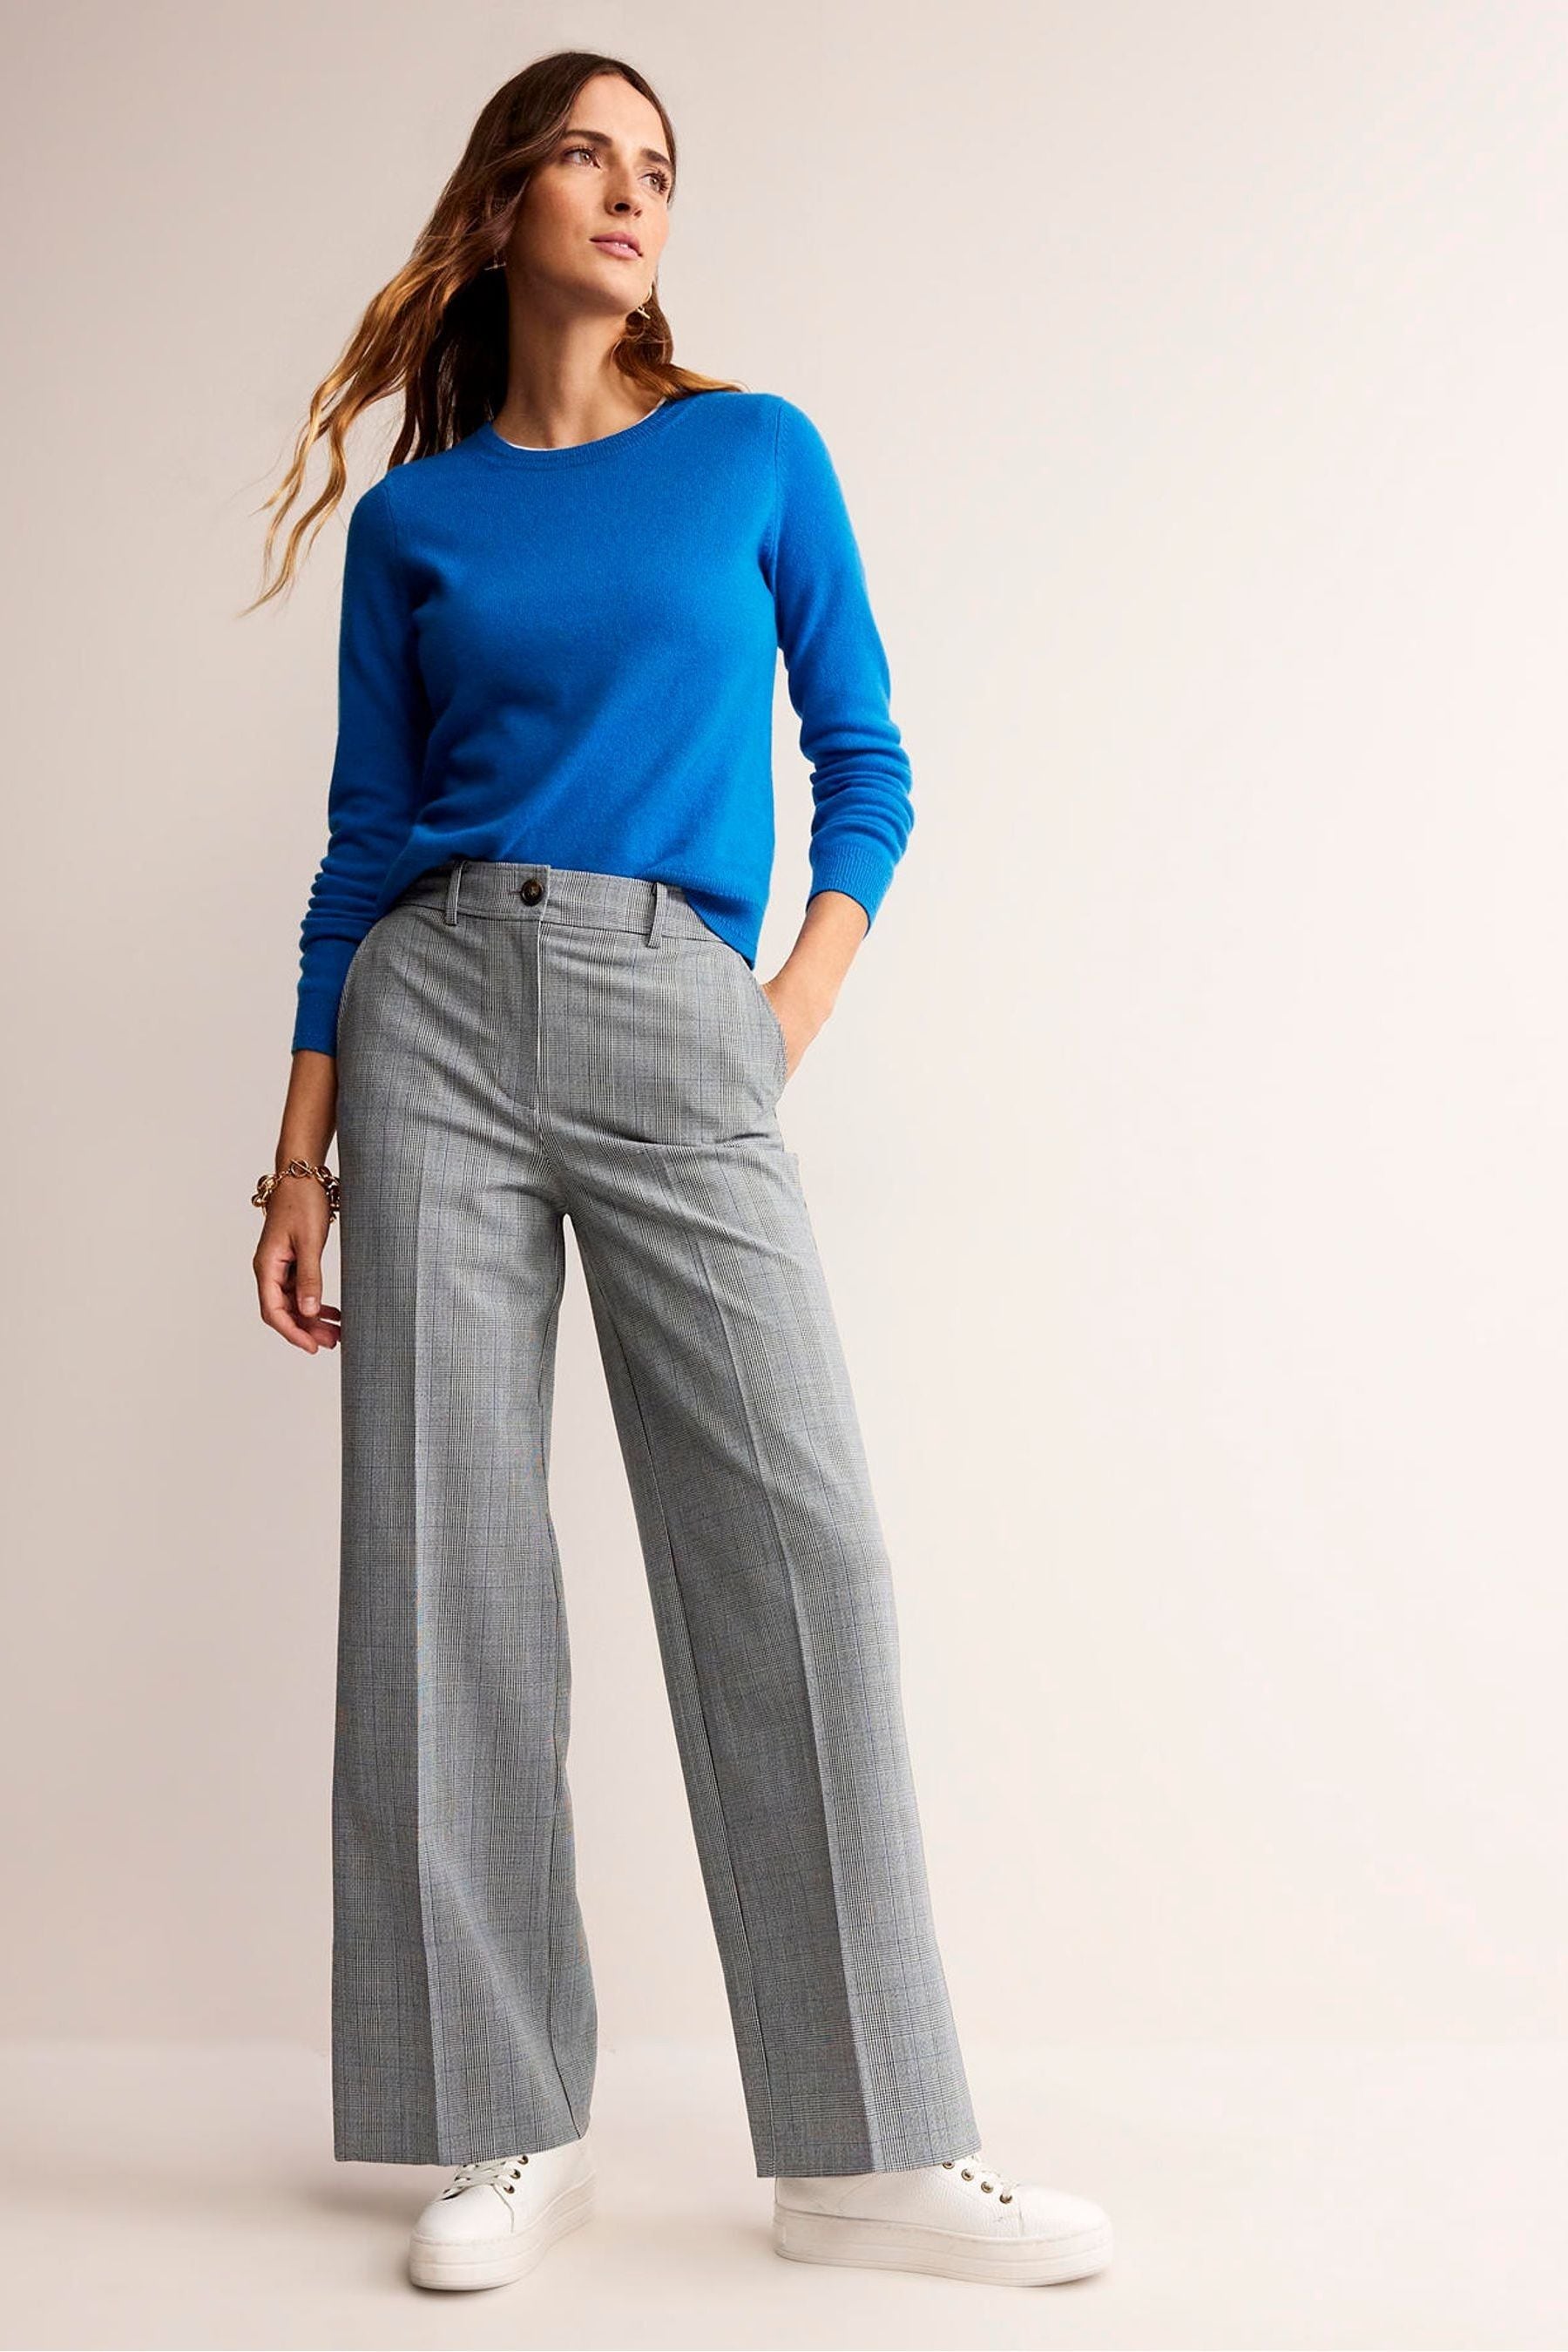 Buy Boden Grey Westbourne Wool-Twill Trousers from the Next UK online shop